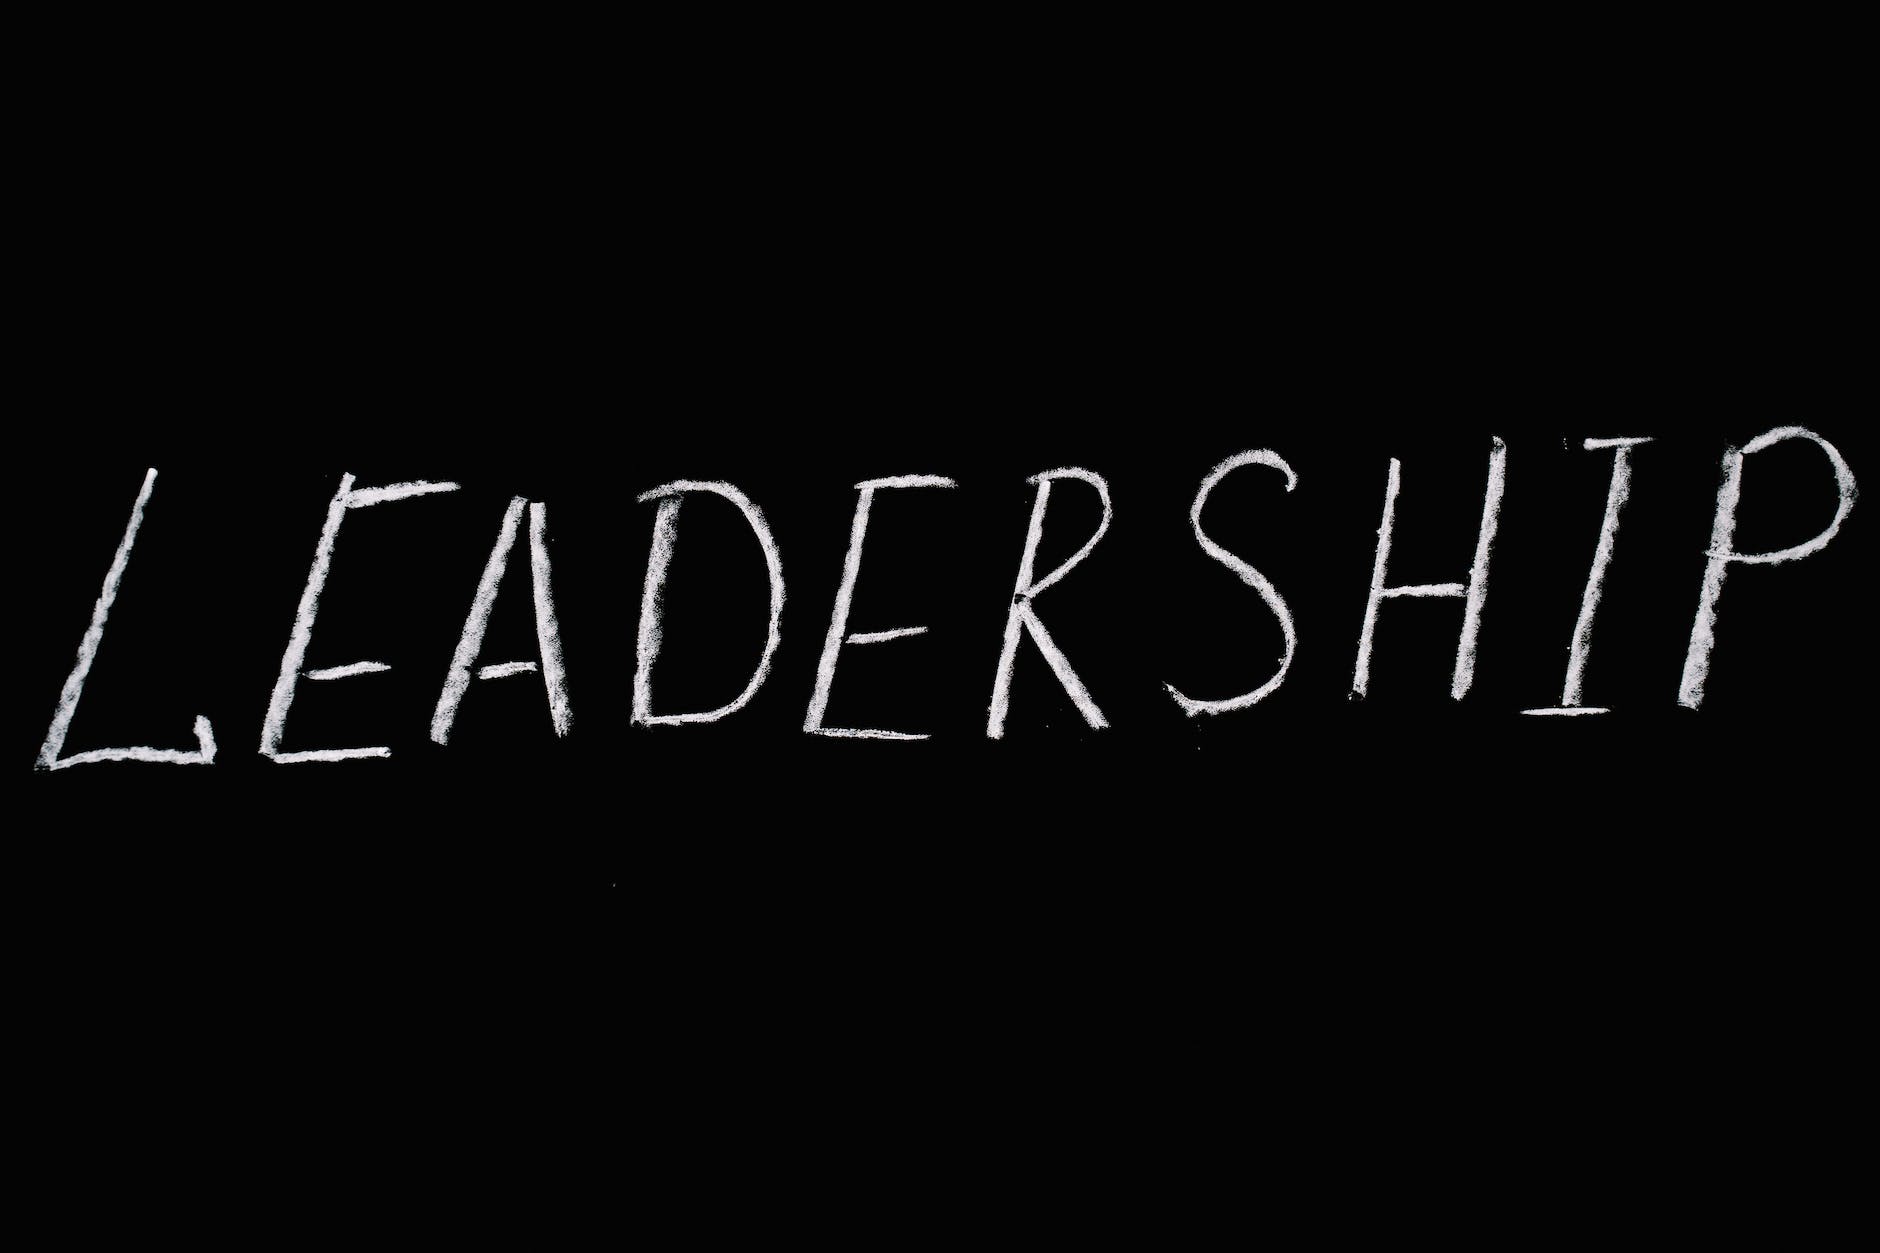 Benefits of a Leadership Certificate